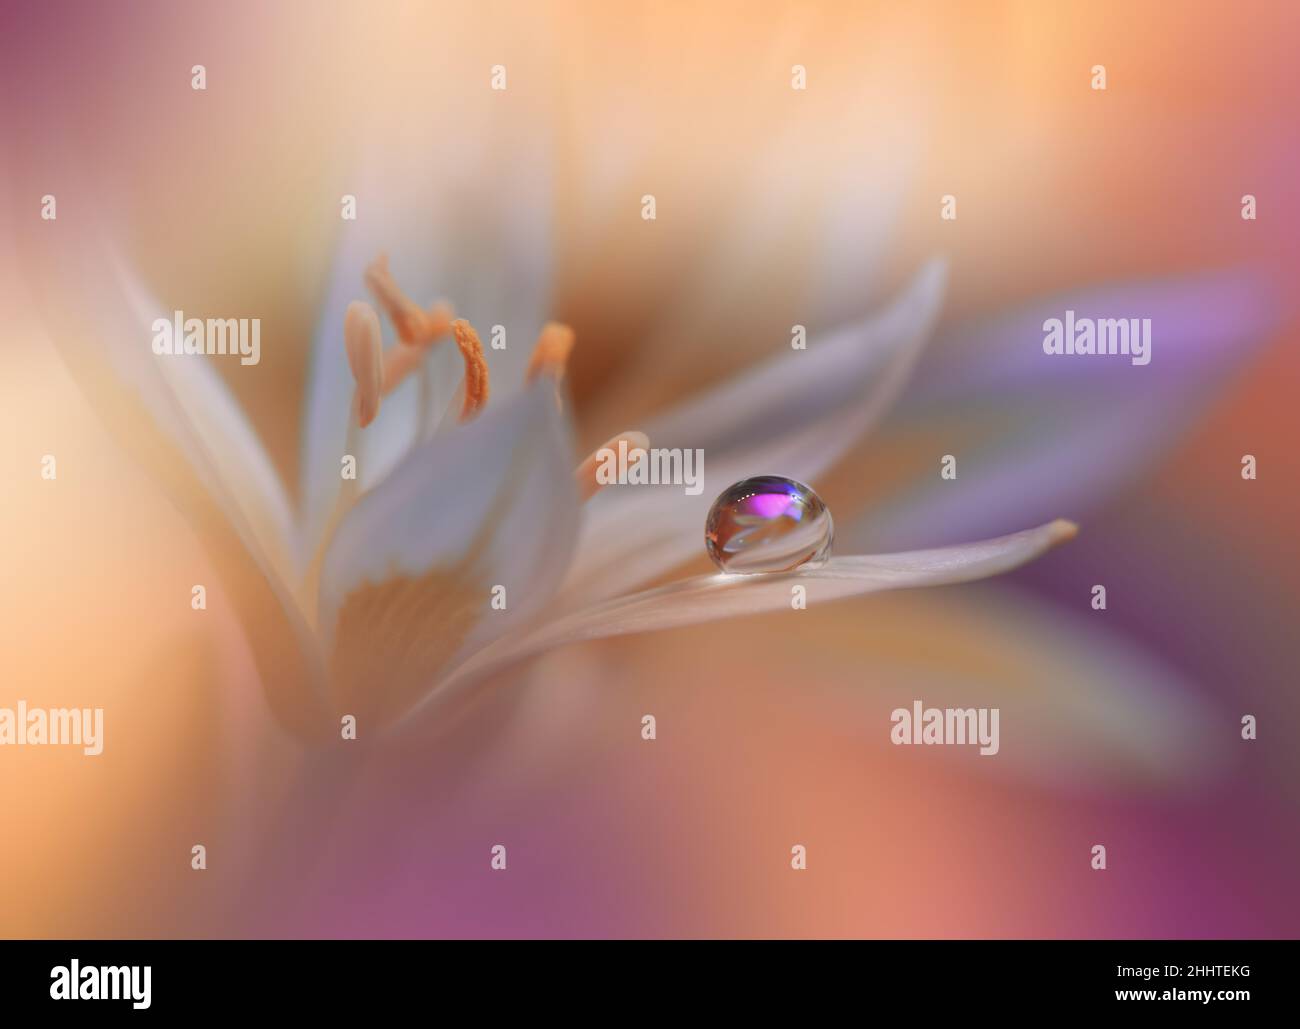 Beautiful Macro Photo.Colorful Flowers.Border Art Design.Magic Light.Close up Photography.Conceptual Abstract Image.Violet and Orange Background.Water Stock Photo